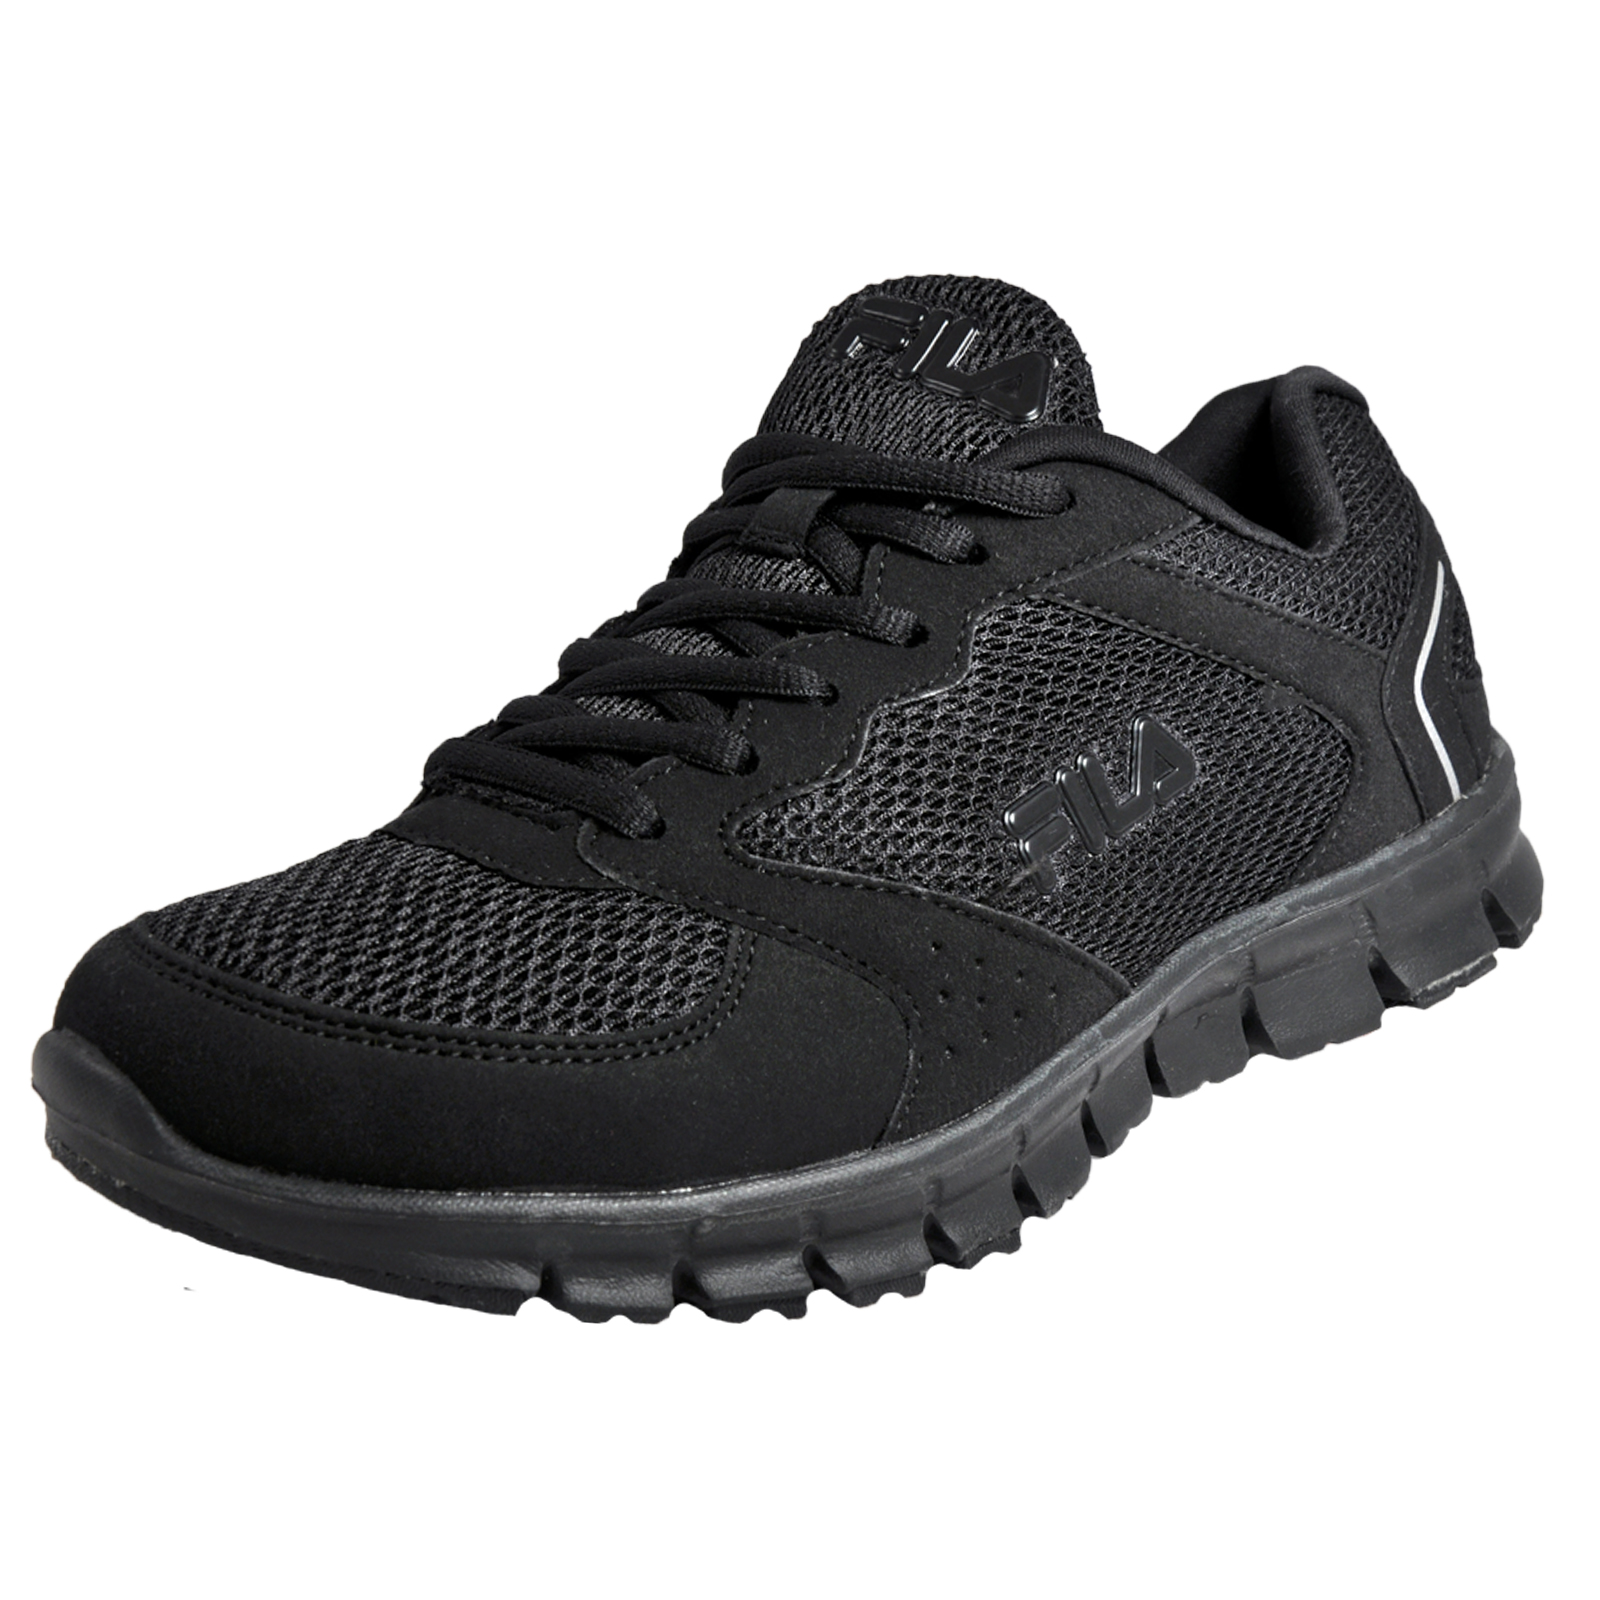 Fila Comet Run Low Mens Running Shoes Fitness Gym Trainers All Black | eBay